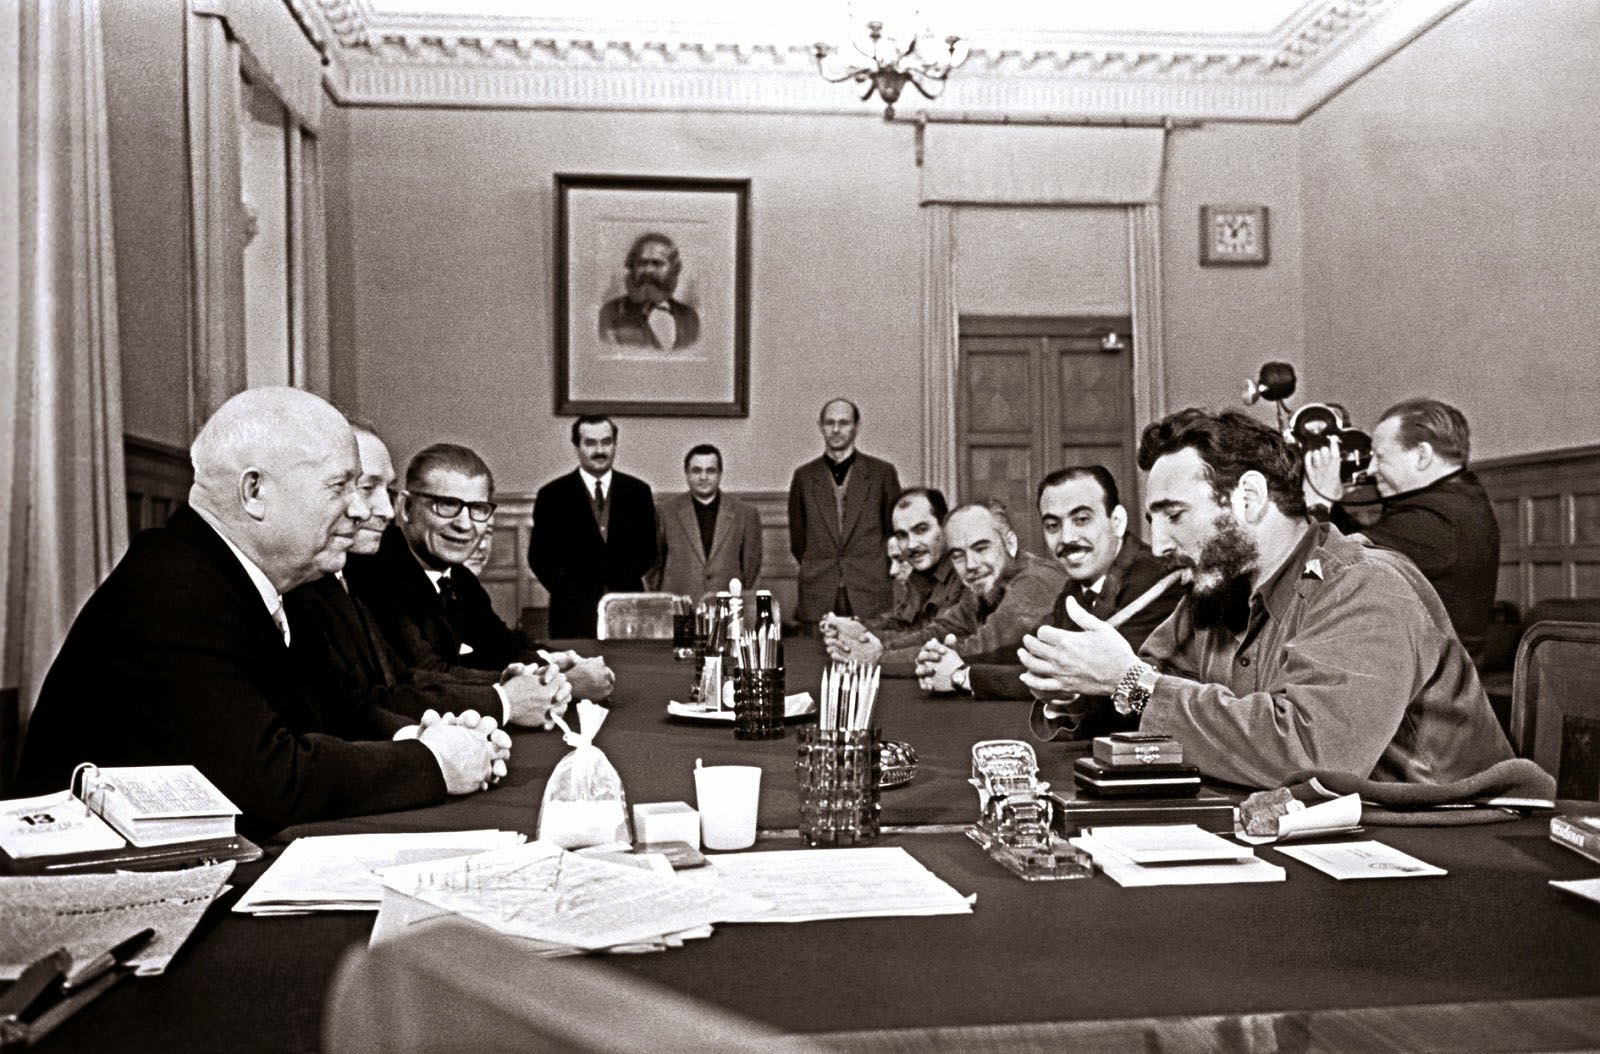 Fidel+Castro+lighting+a+cigar+and+wearing+two+Rolex+watches+during+a+meeting+with+Khrushchev,+Kremlin,+1963.jpg